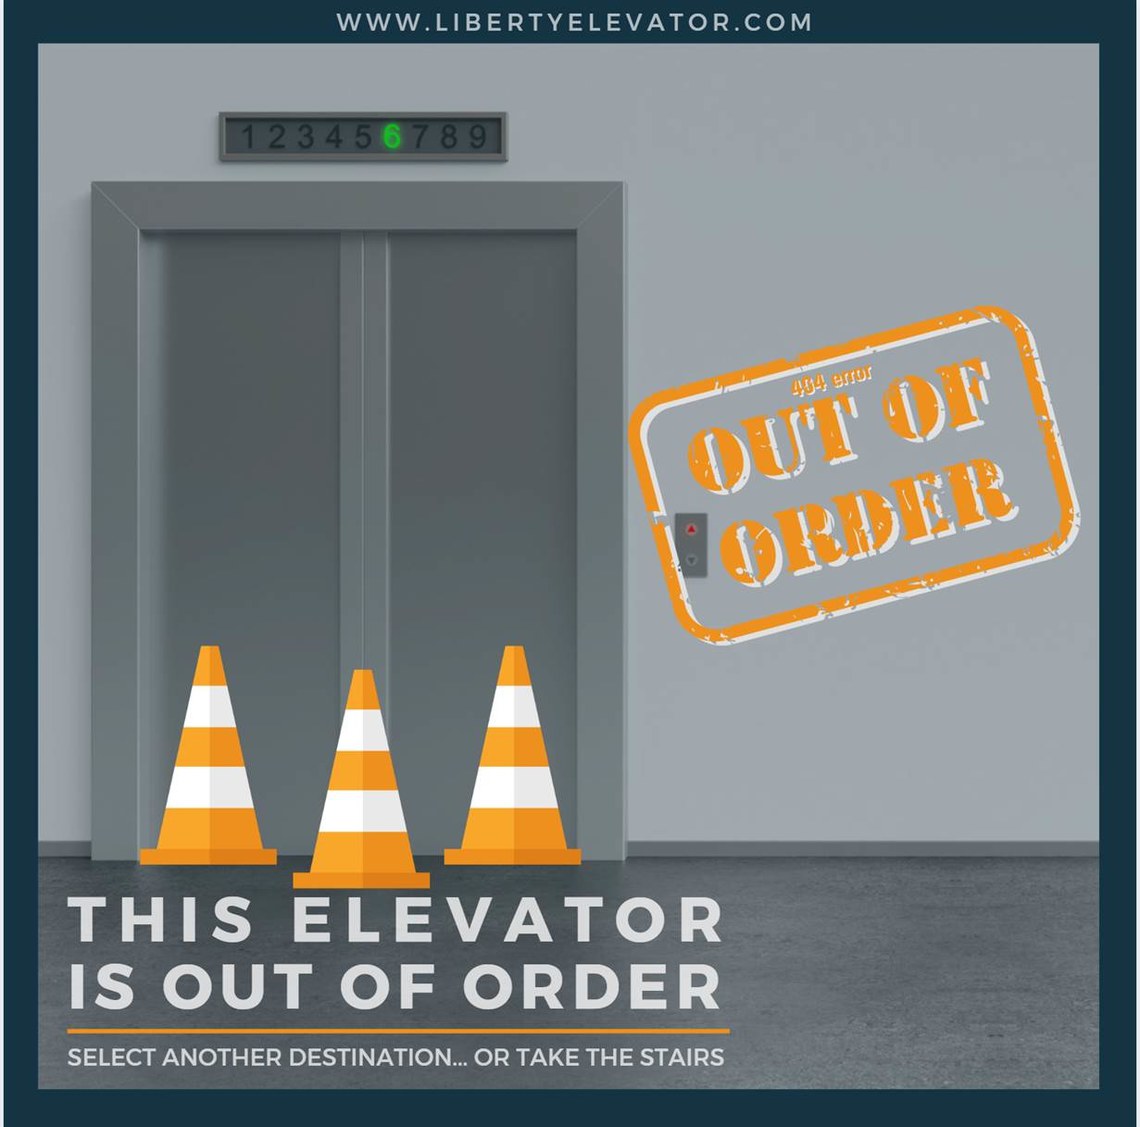 This Elevator is out of order sign with image of elevator and orange cones